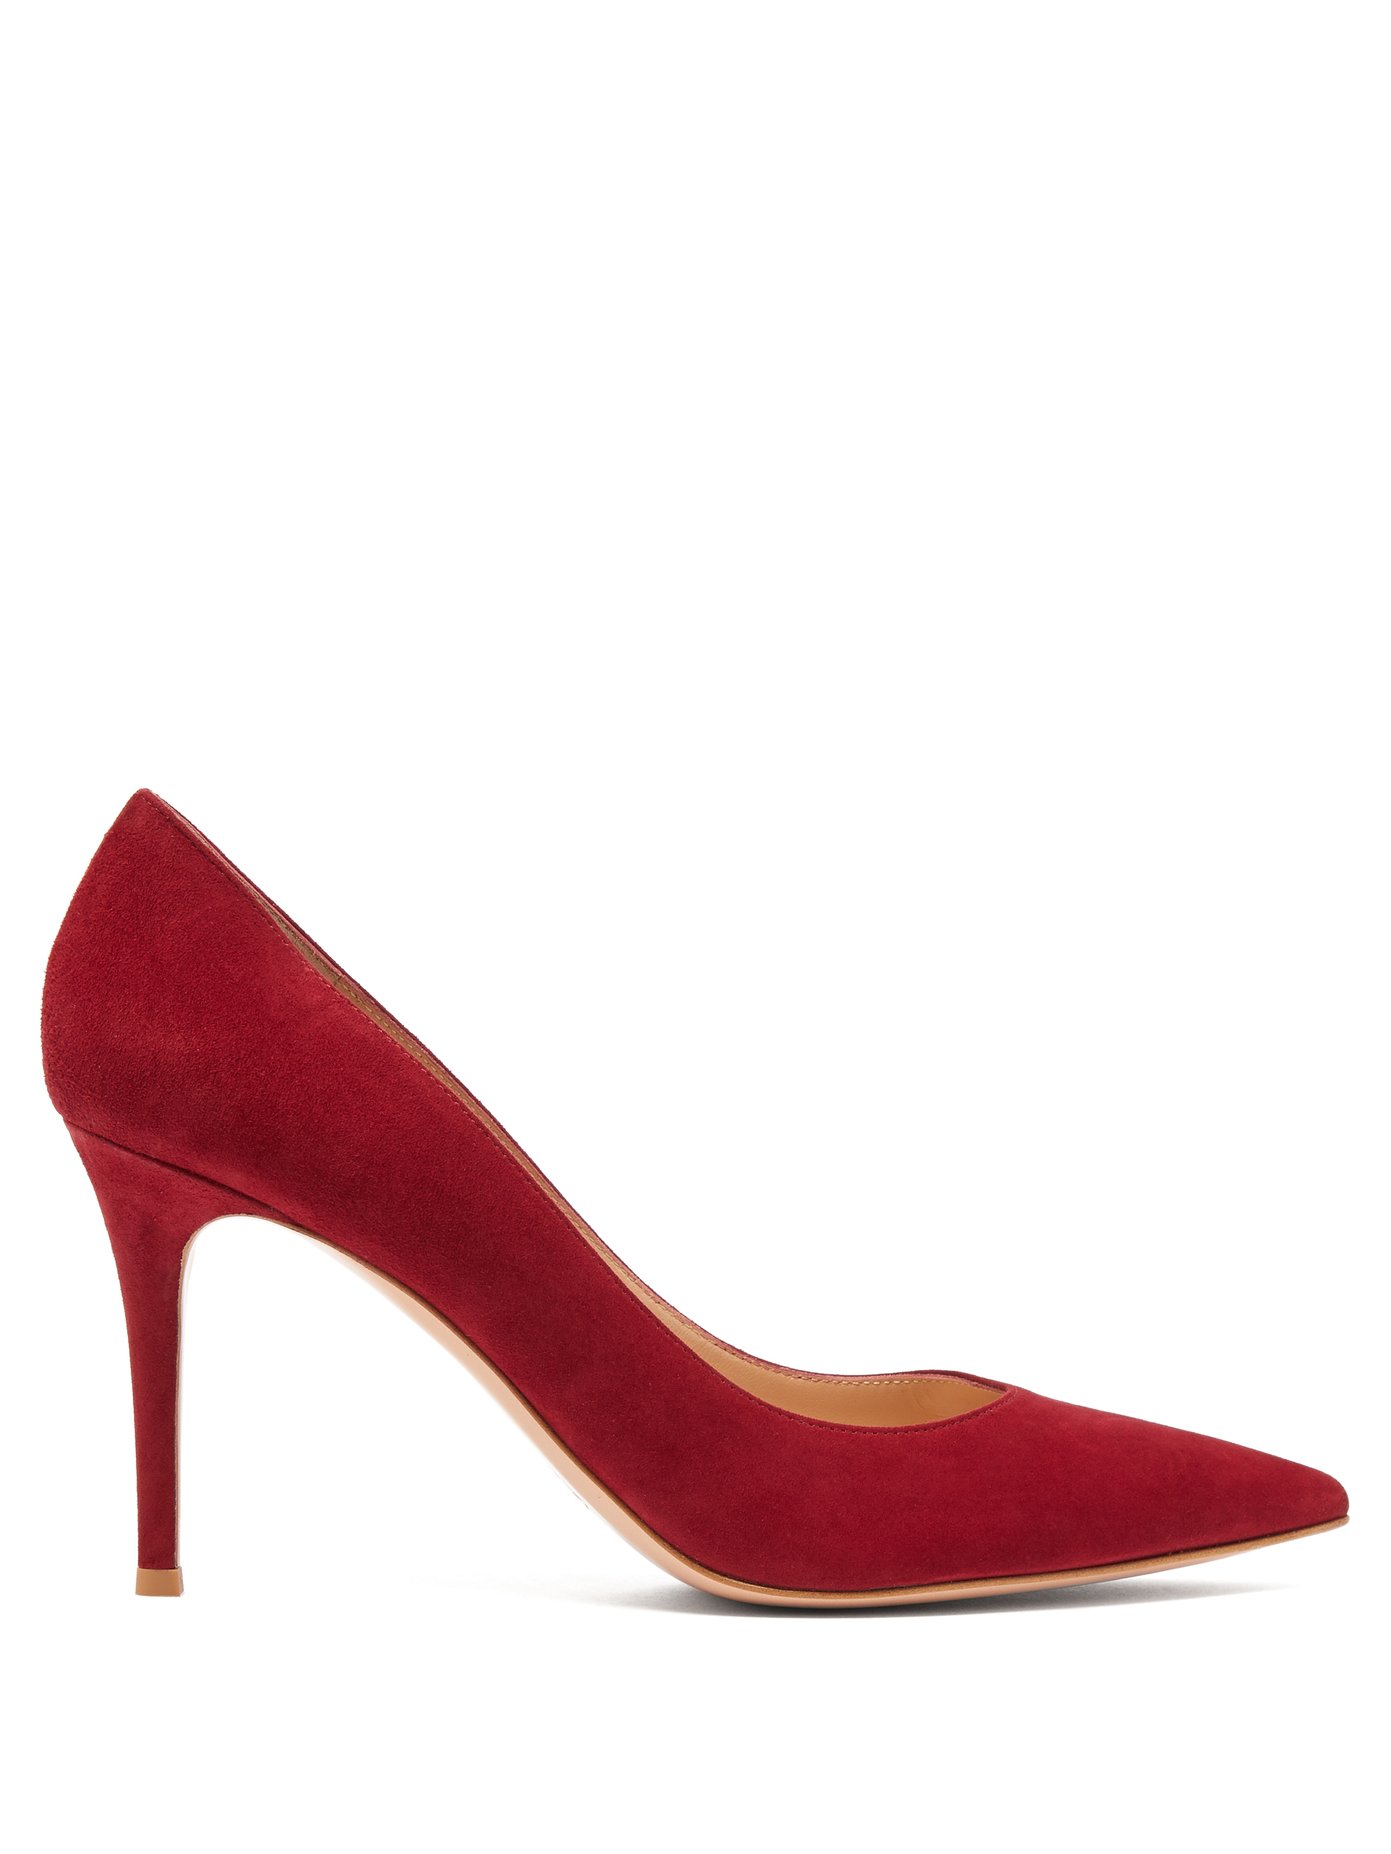 gianvito rossi red suede pumps